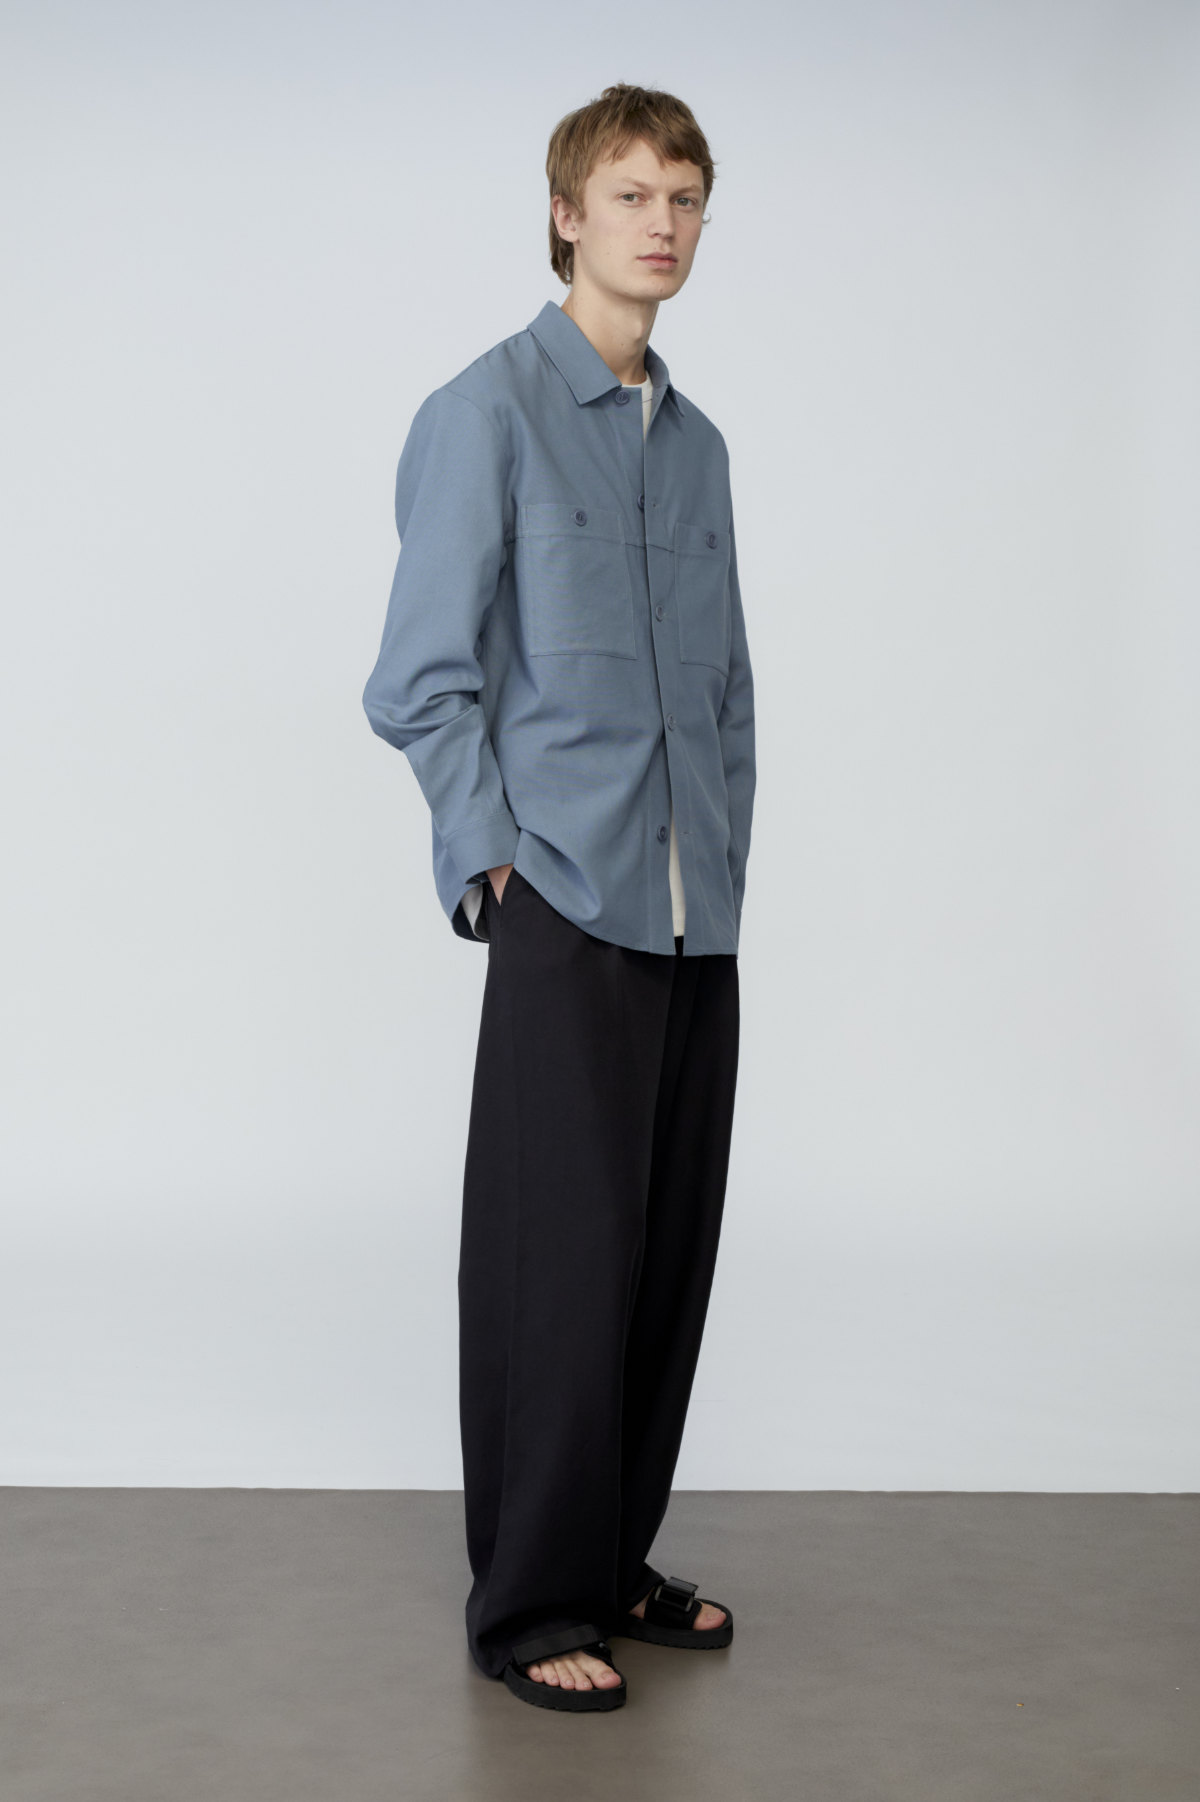 COS Spring Summer 2021 Collection